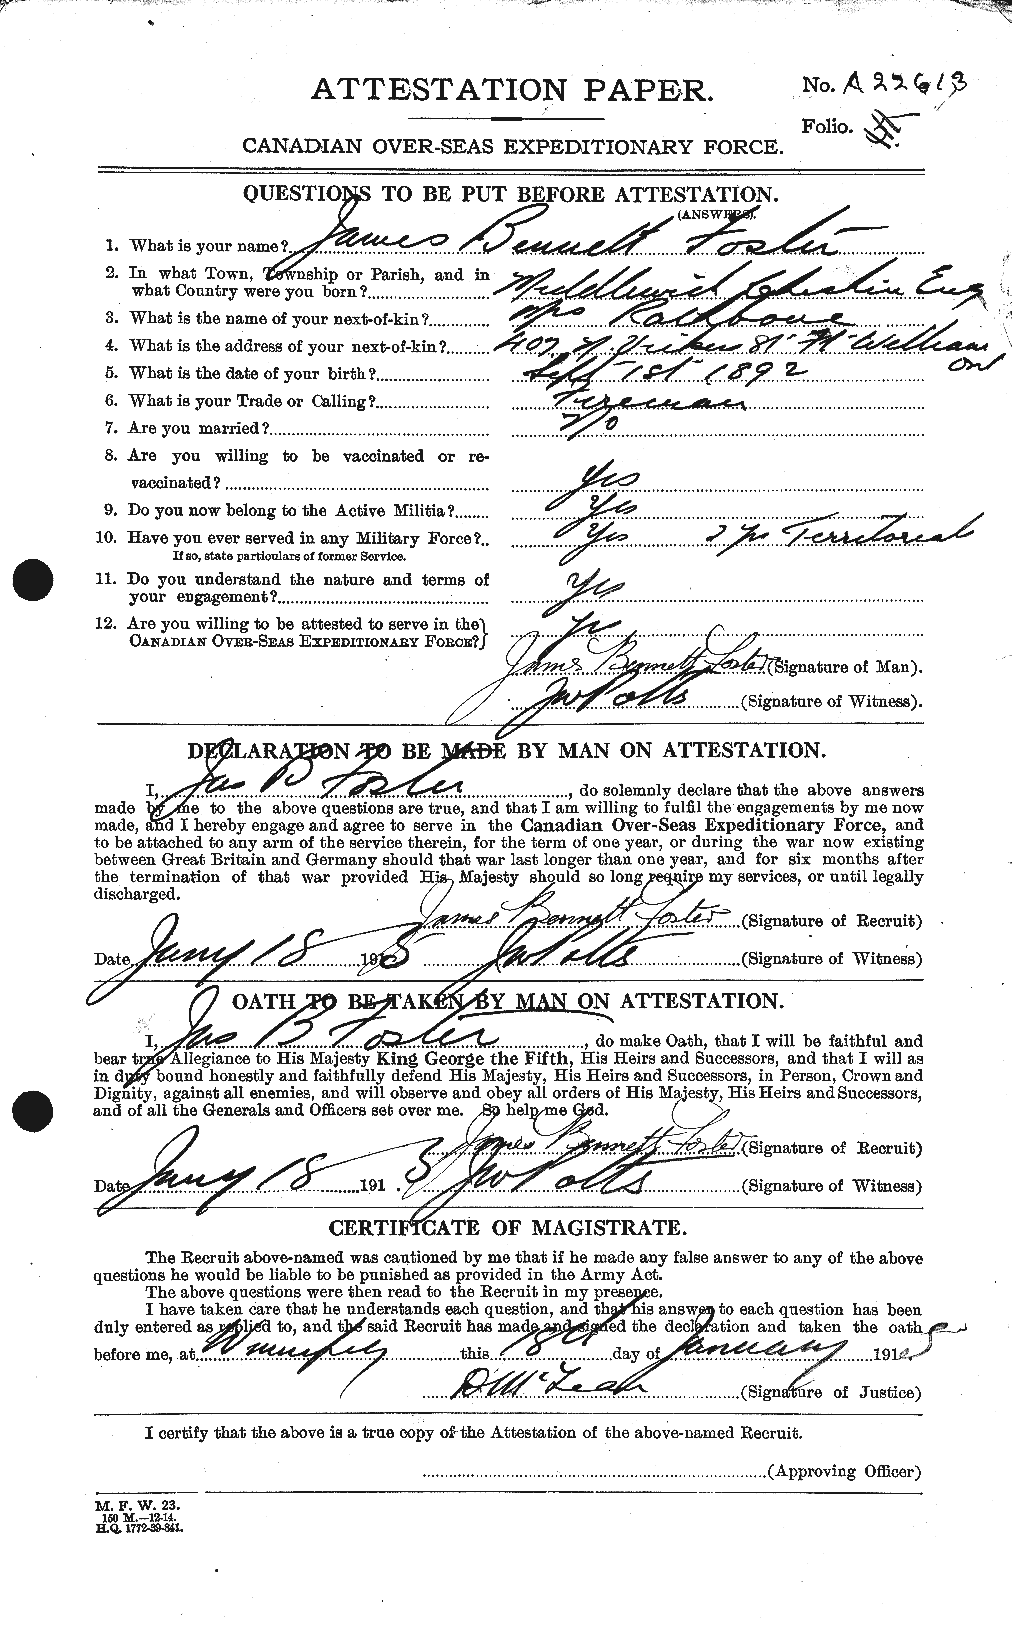 Personnel Records of the First World War - CEF 333299a